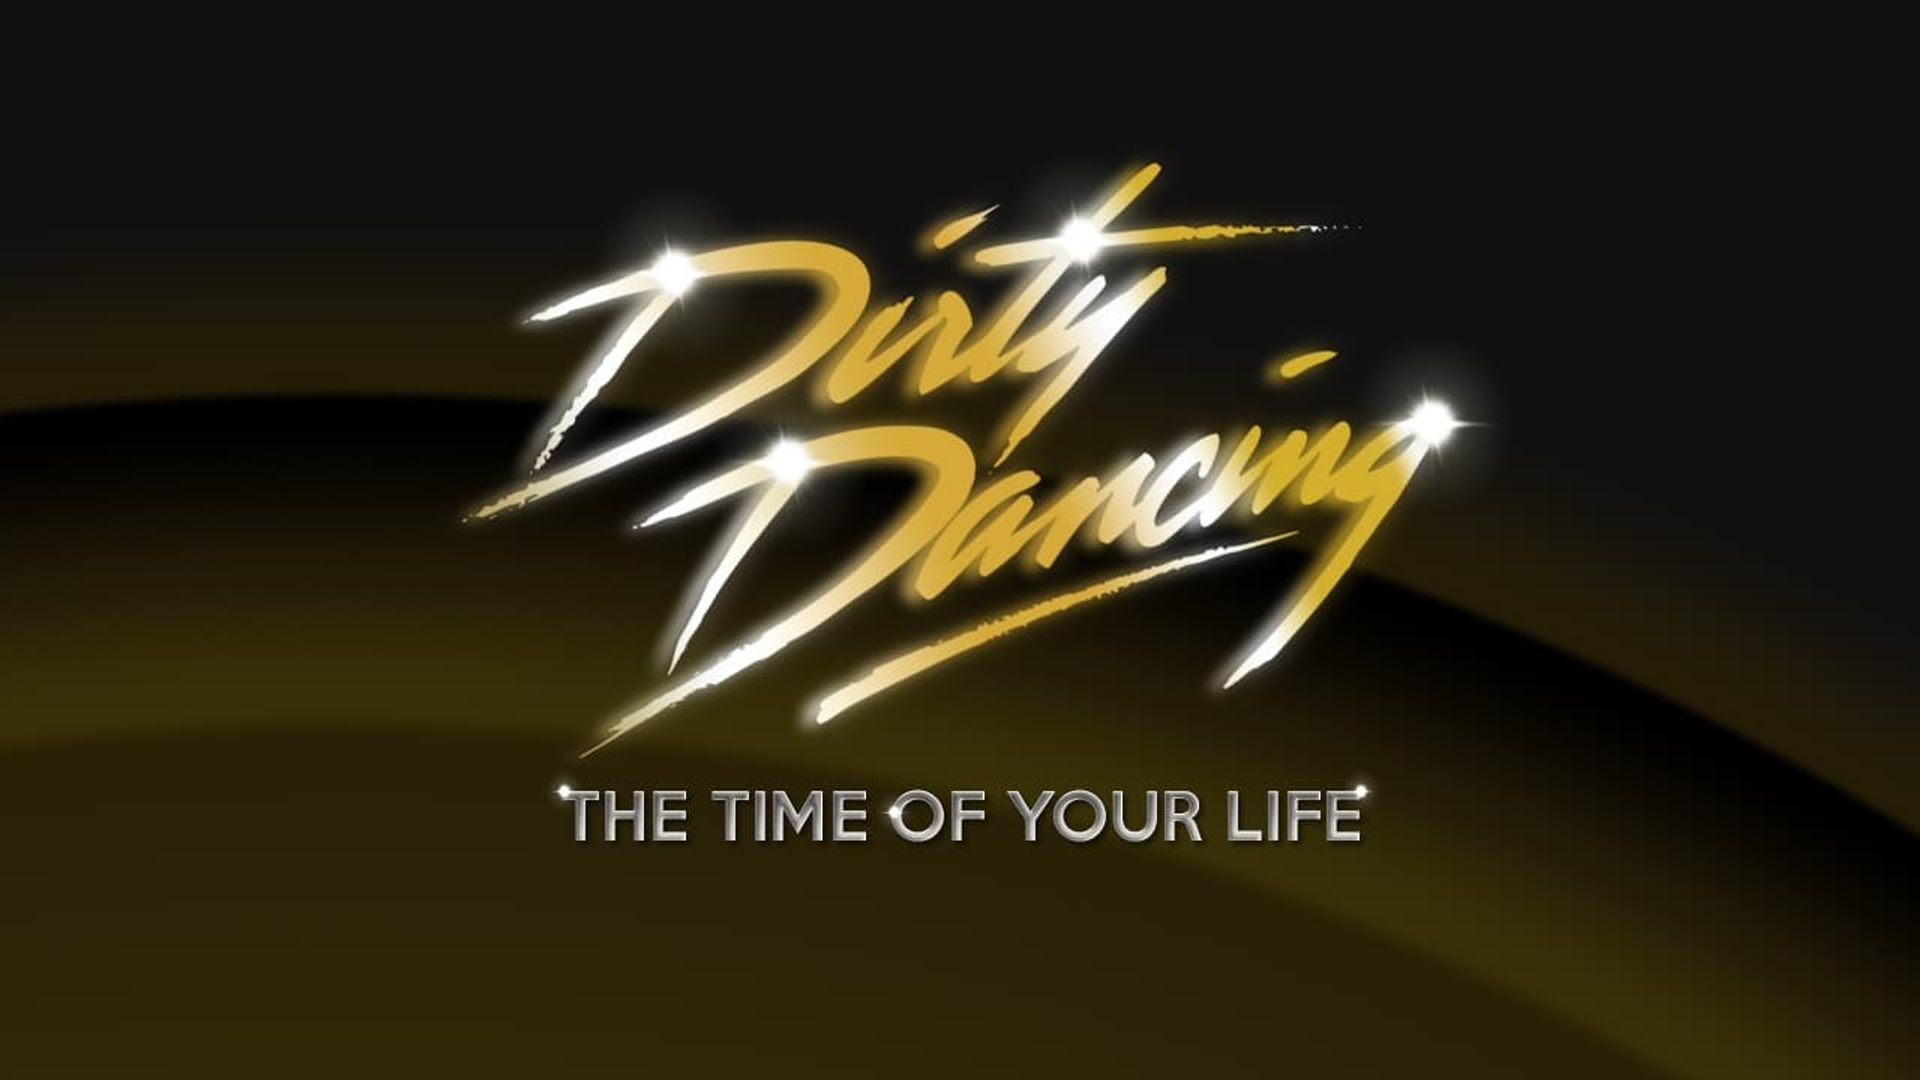 Dirty Dancing: The Time of Your Life background